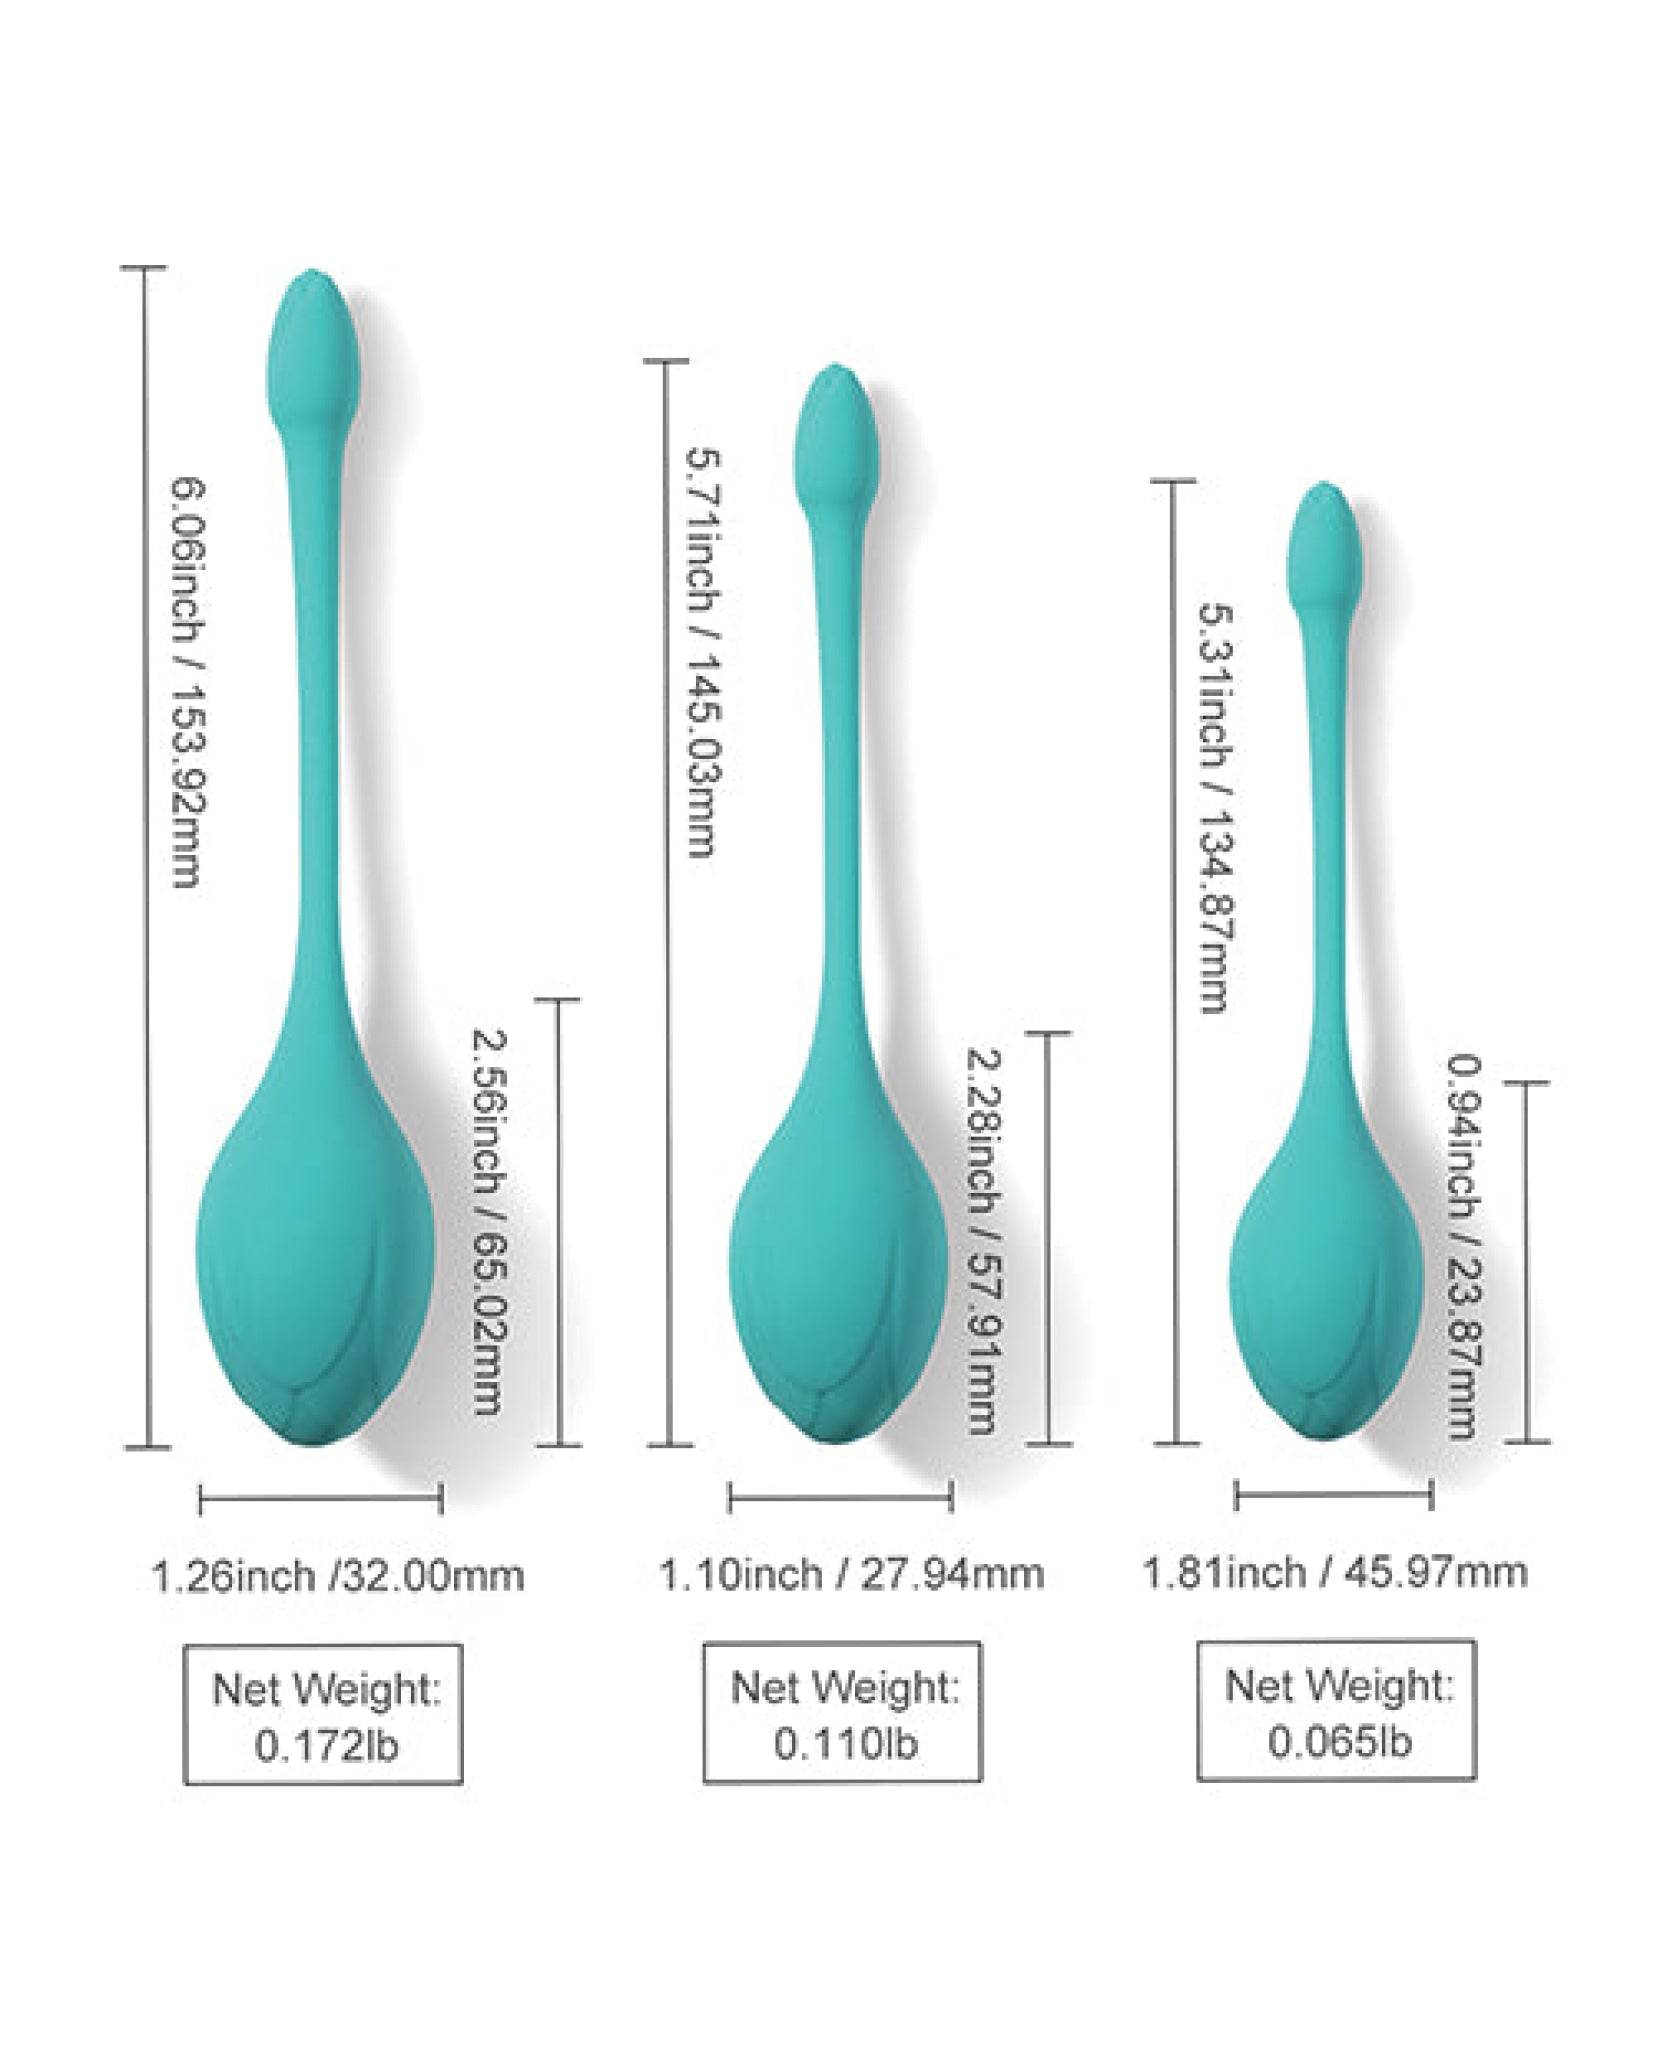 Bluebell Floral 3 Size & Weight Kegel Ball Exercise Set - Blue Uc Global Trade INChoney Play B